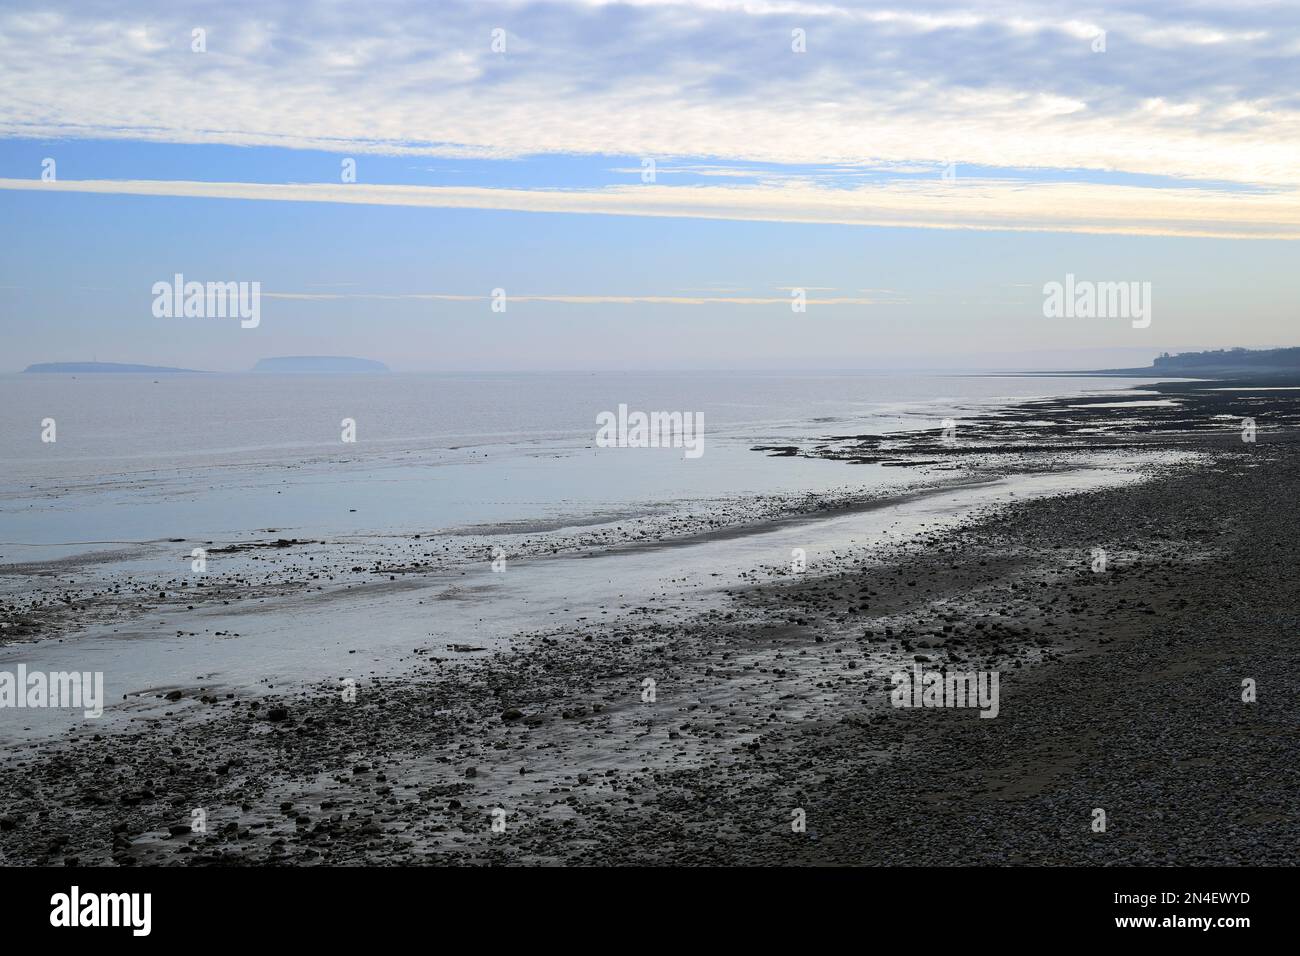 Flat Holm Island and Steep Holm Island, Severn Estuary from Penarth Esplanade, South Wales. Stock Photo